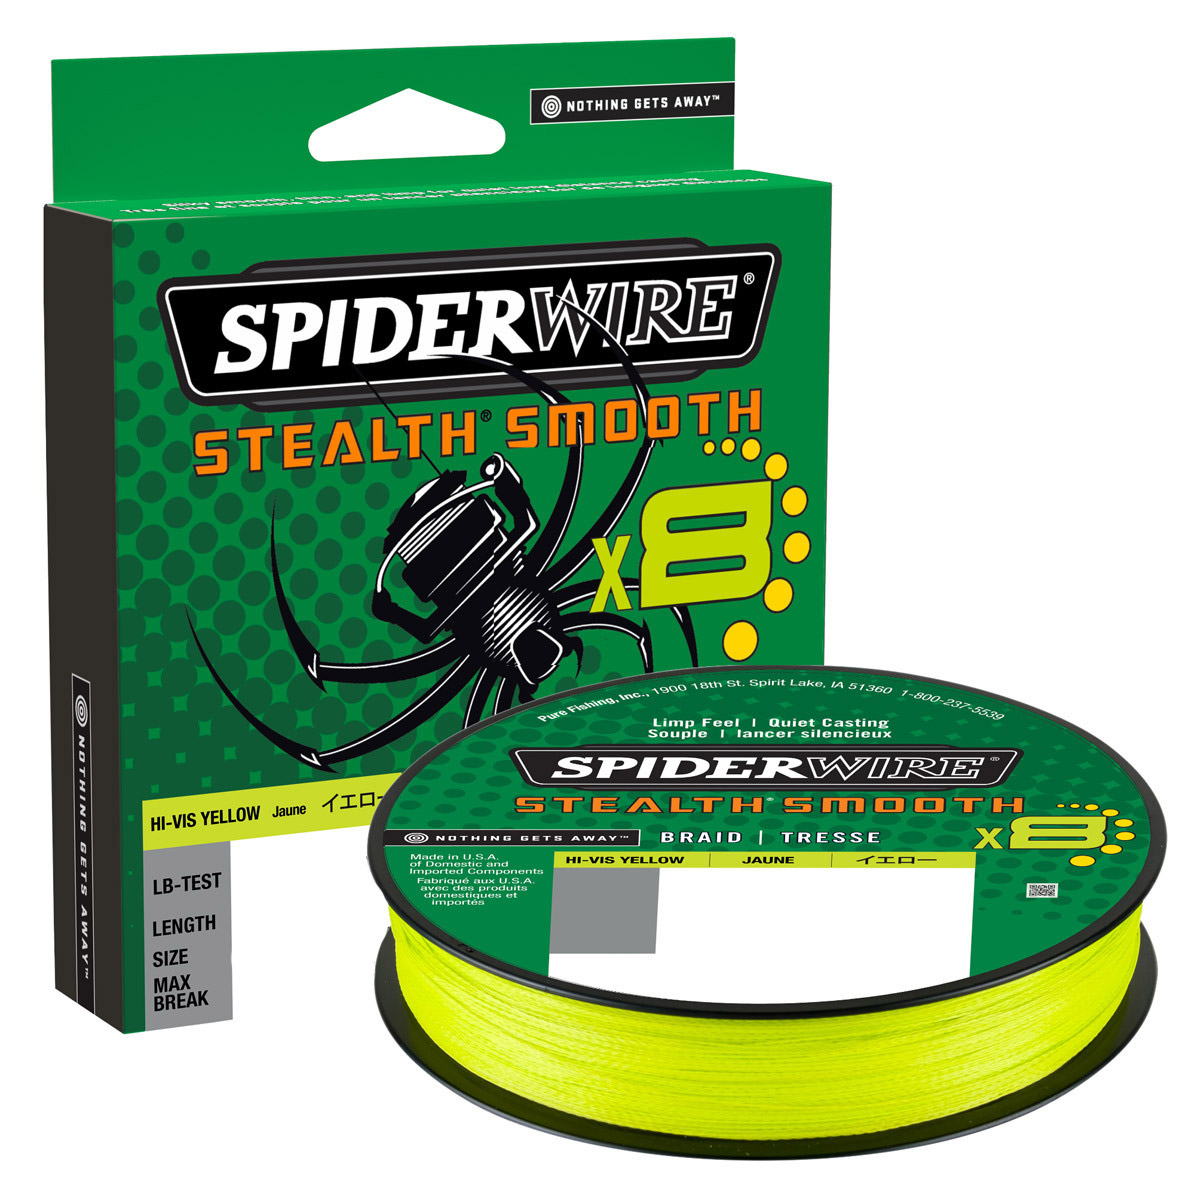 Spiderwire Stealth Smooth 8 Hi Vis Yellow 150 meter